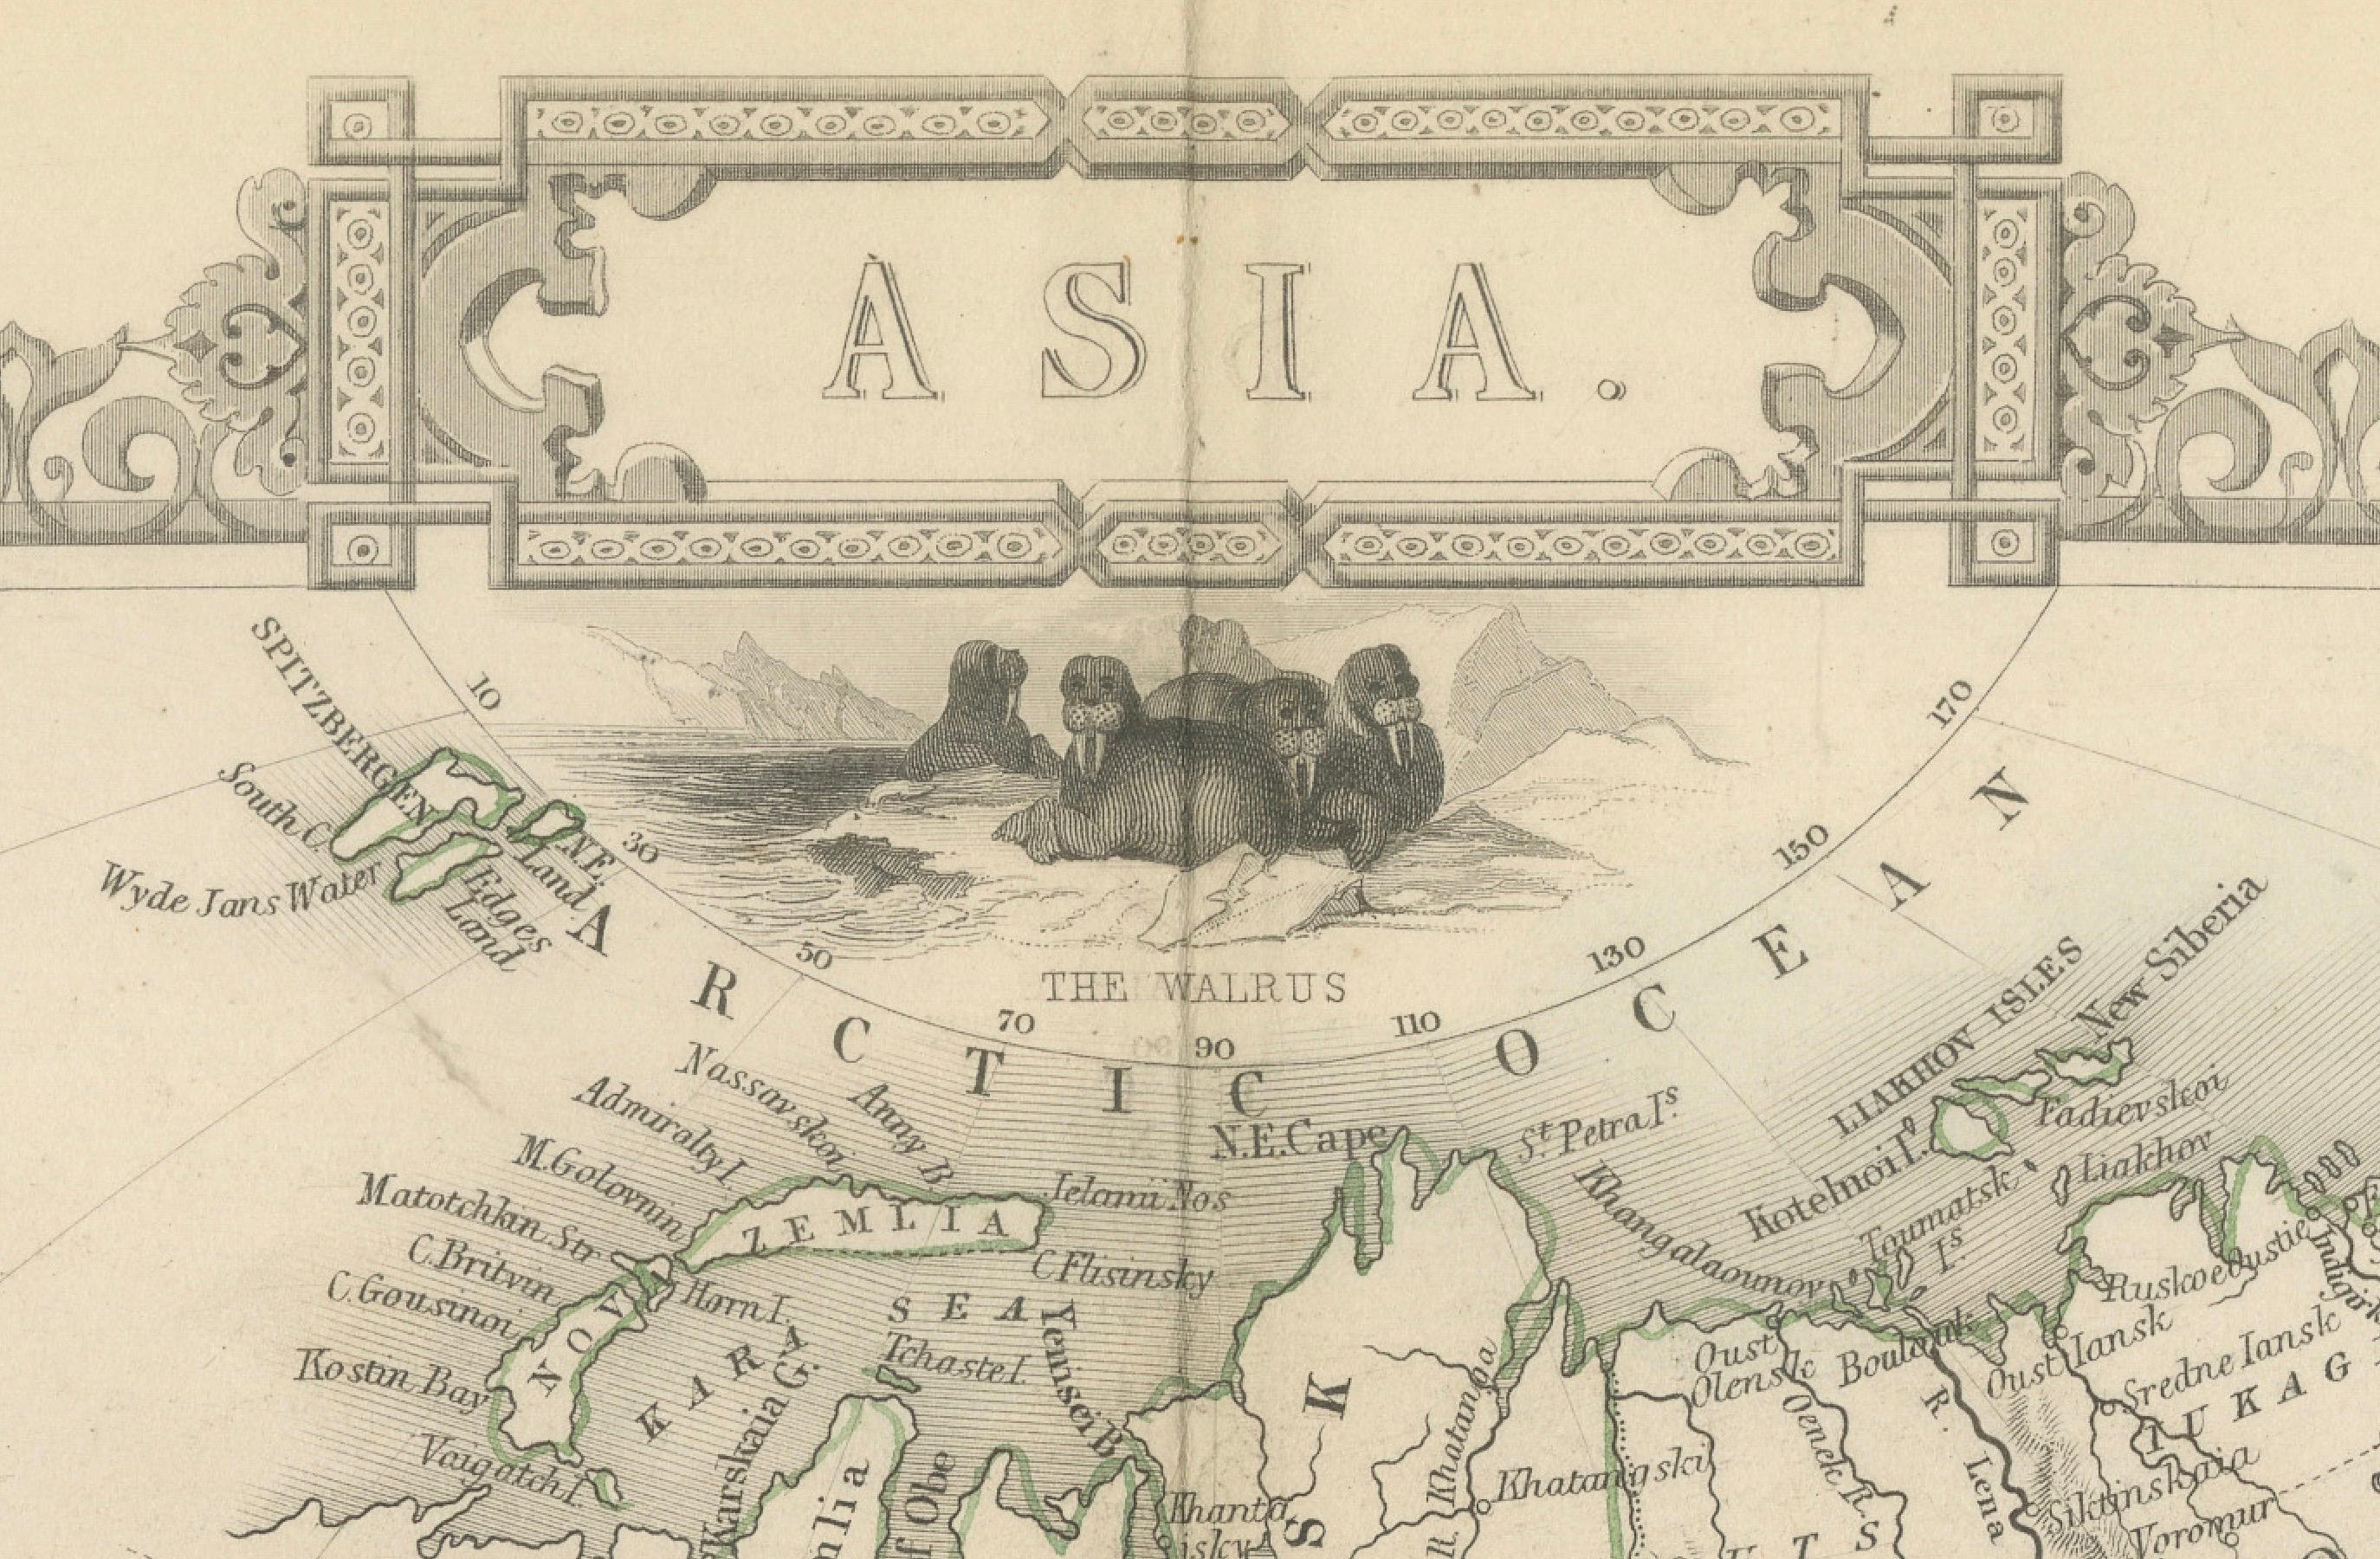 John Tallis & Company, known for their decorative mid-19th-century maps, created this map of Asia. These maps were distinctive for their elaborate borders and detailed vignettes. They often included scenes that reflected the culture, geography, and